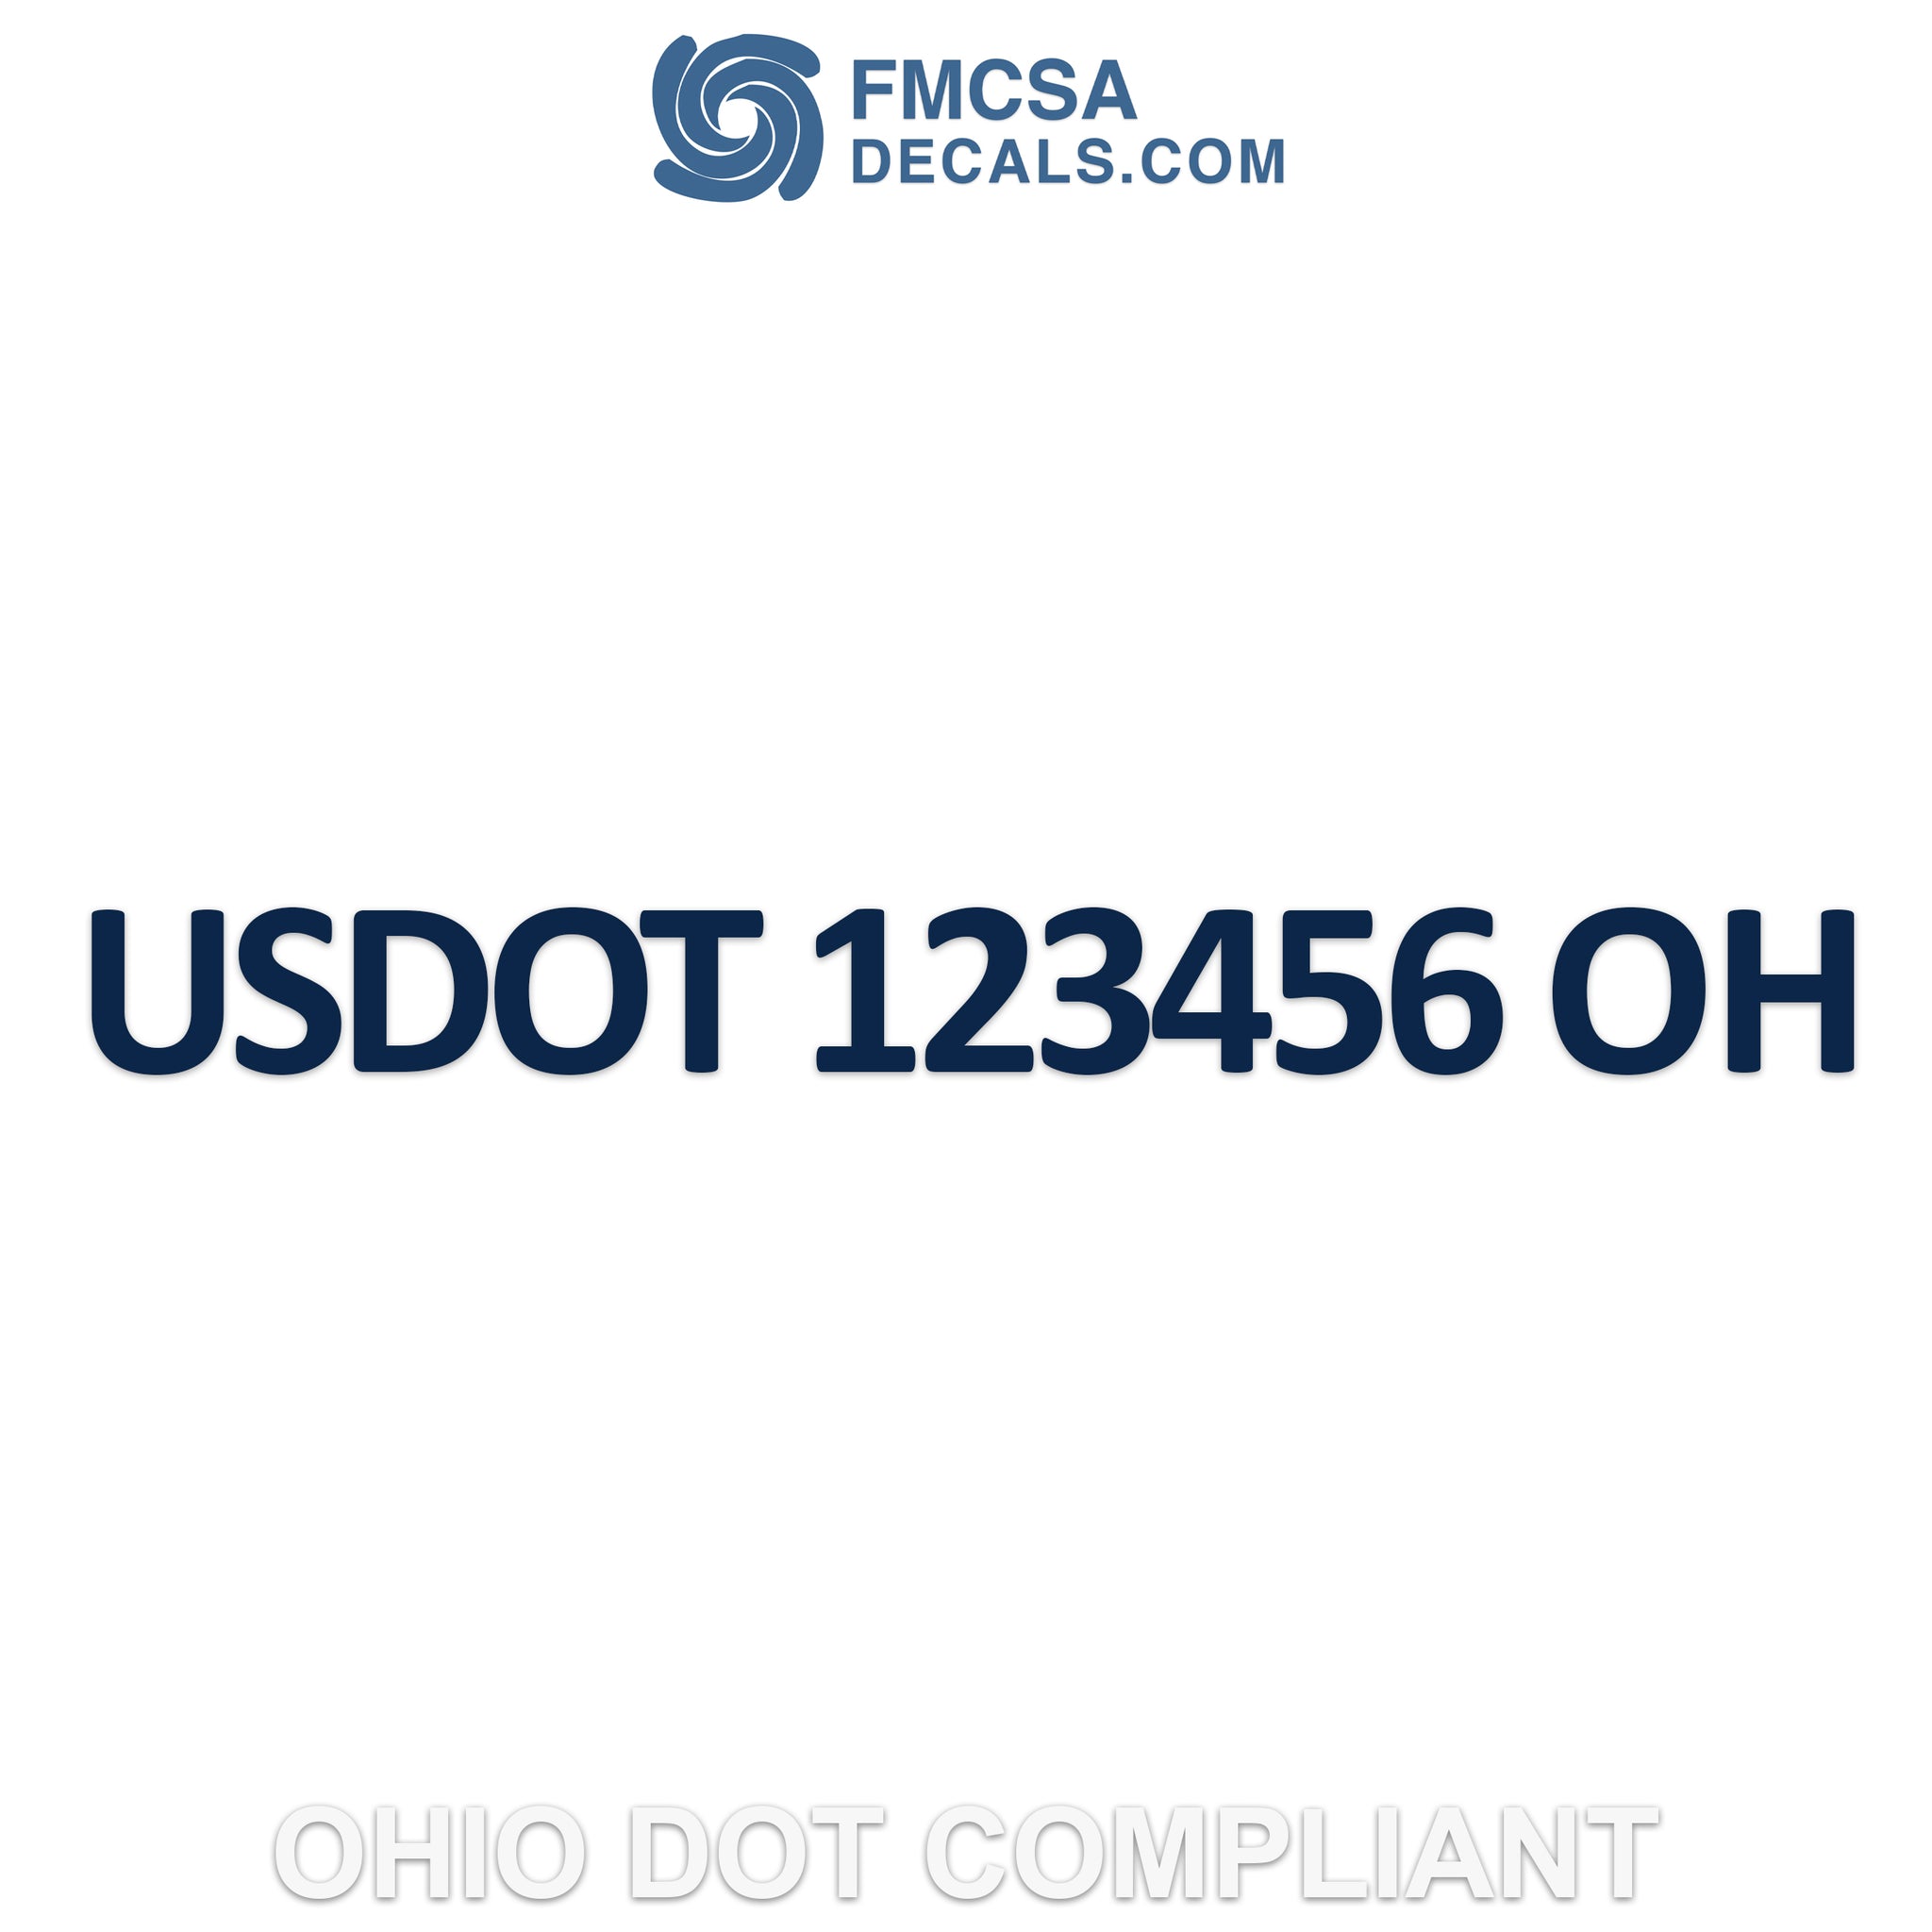 Ohio US DOT Number Decal (Set of 2) FMCSA Decals